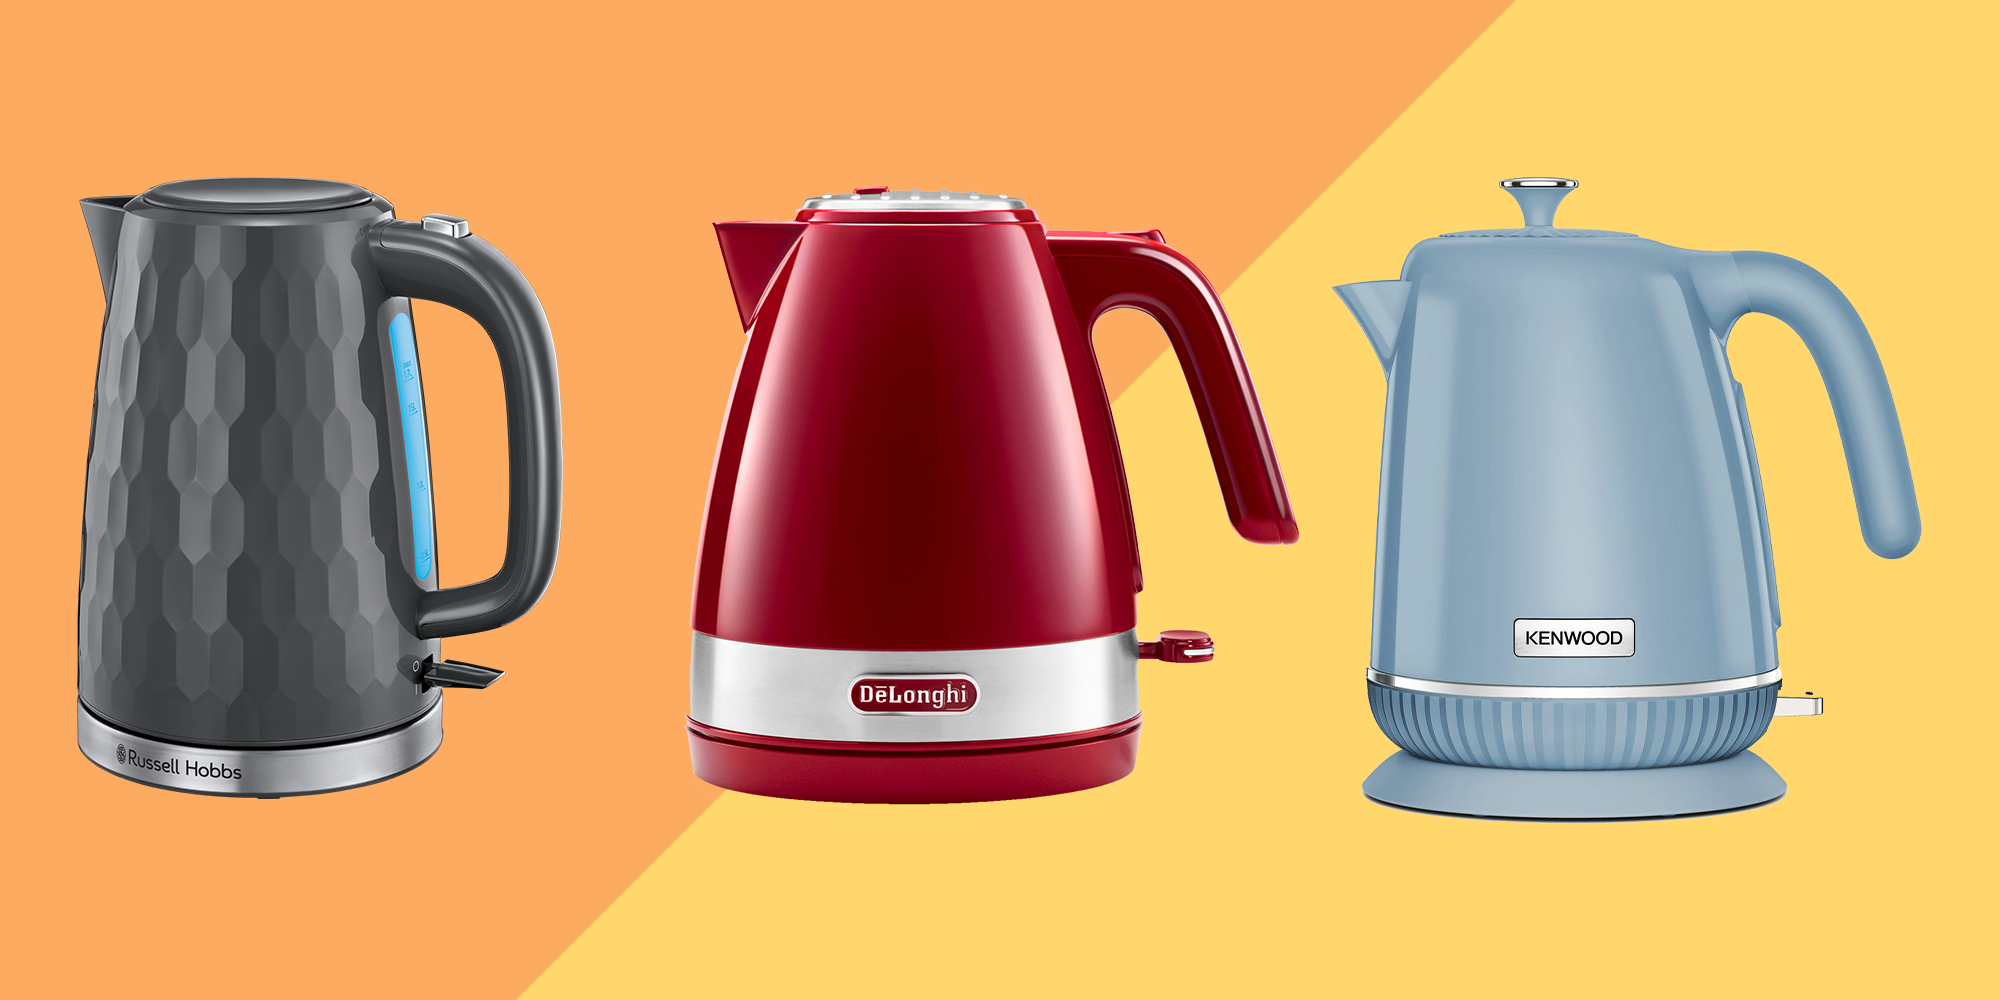 Best kettles for every budget list: The best-looking kettles for